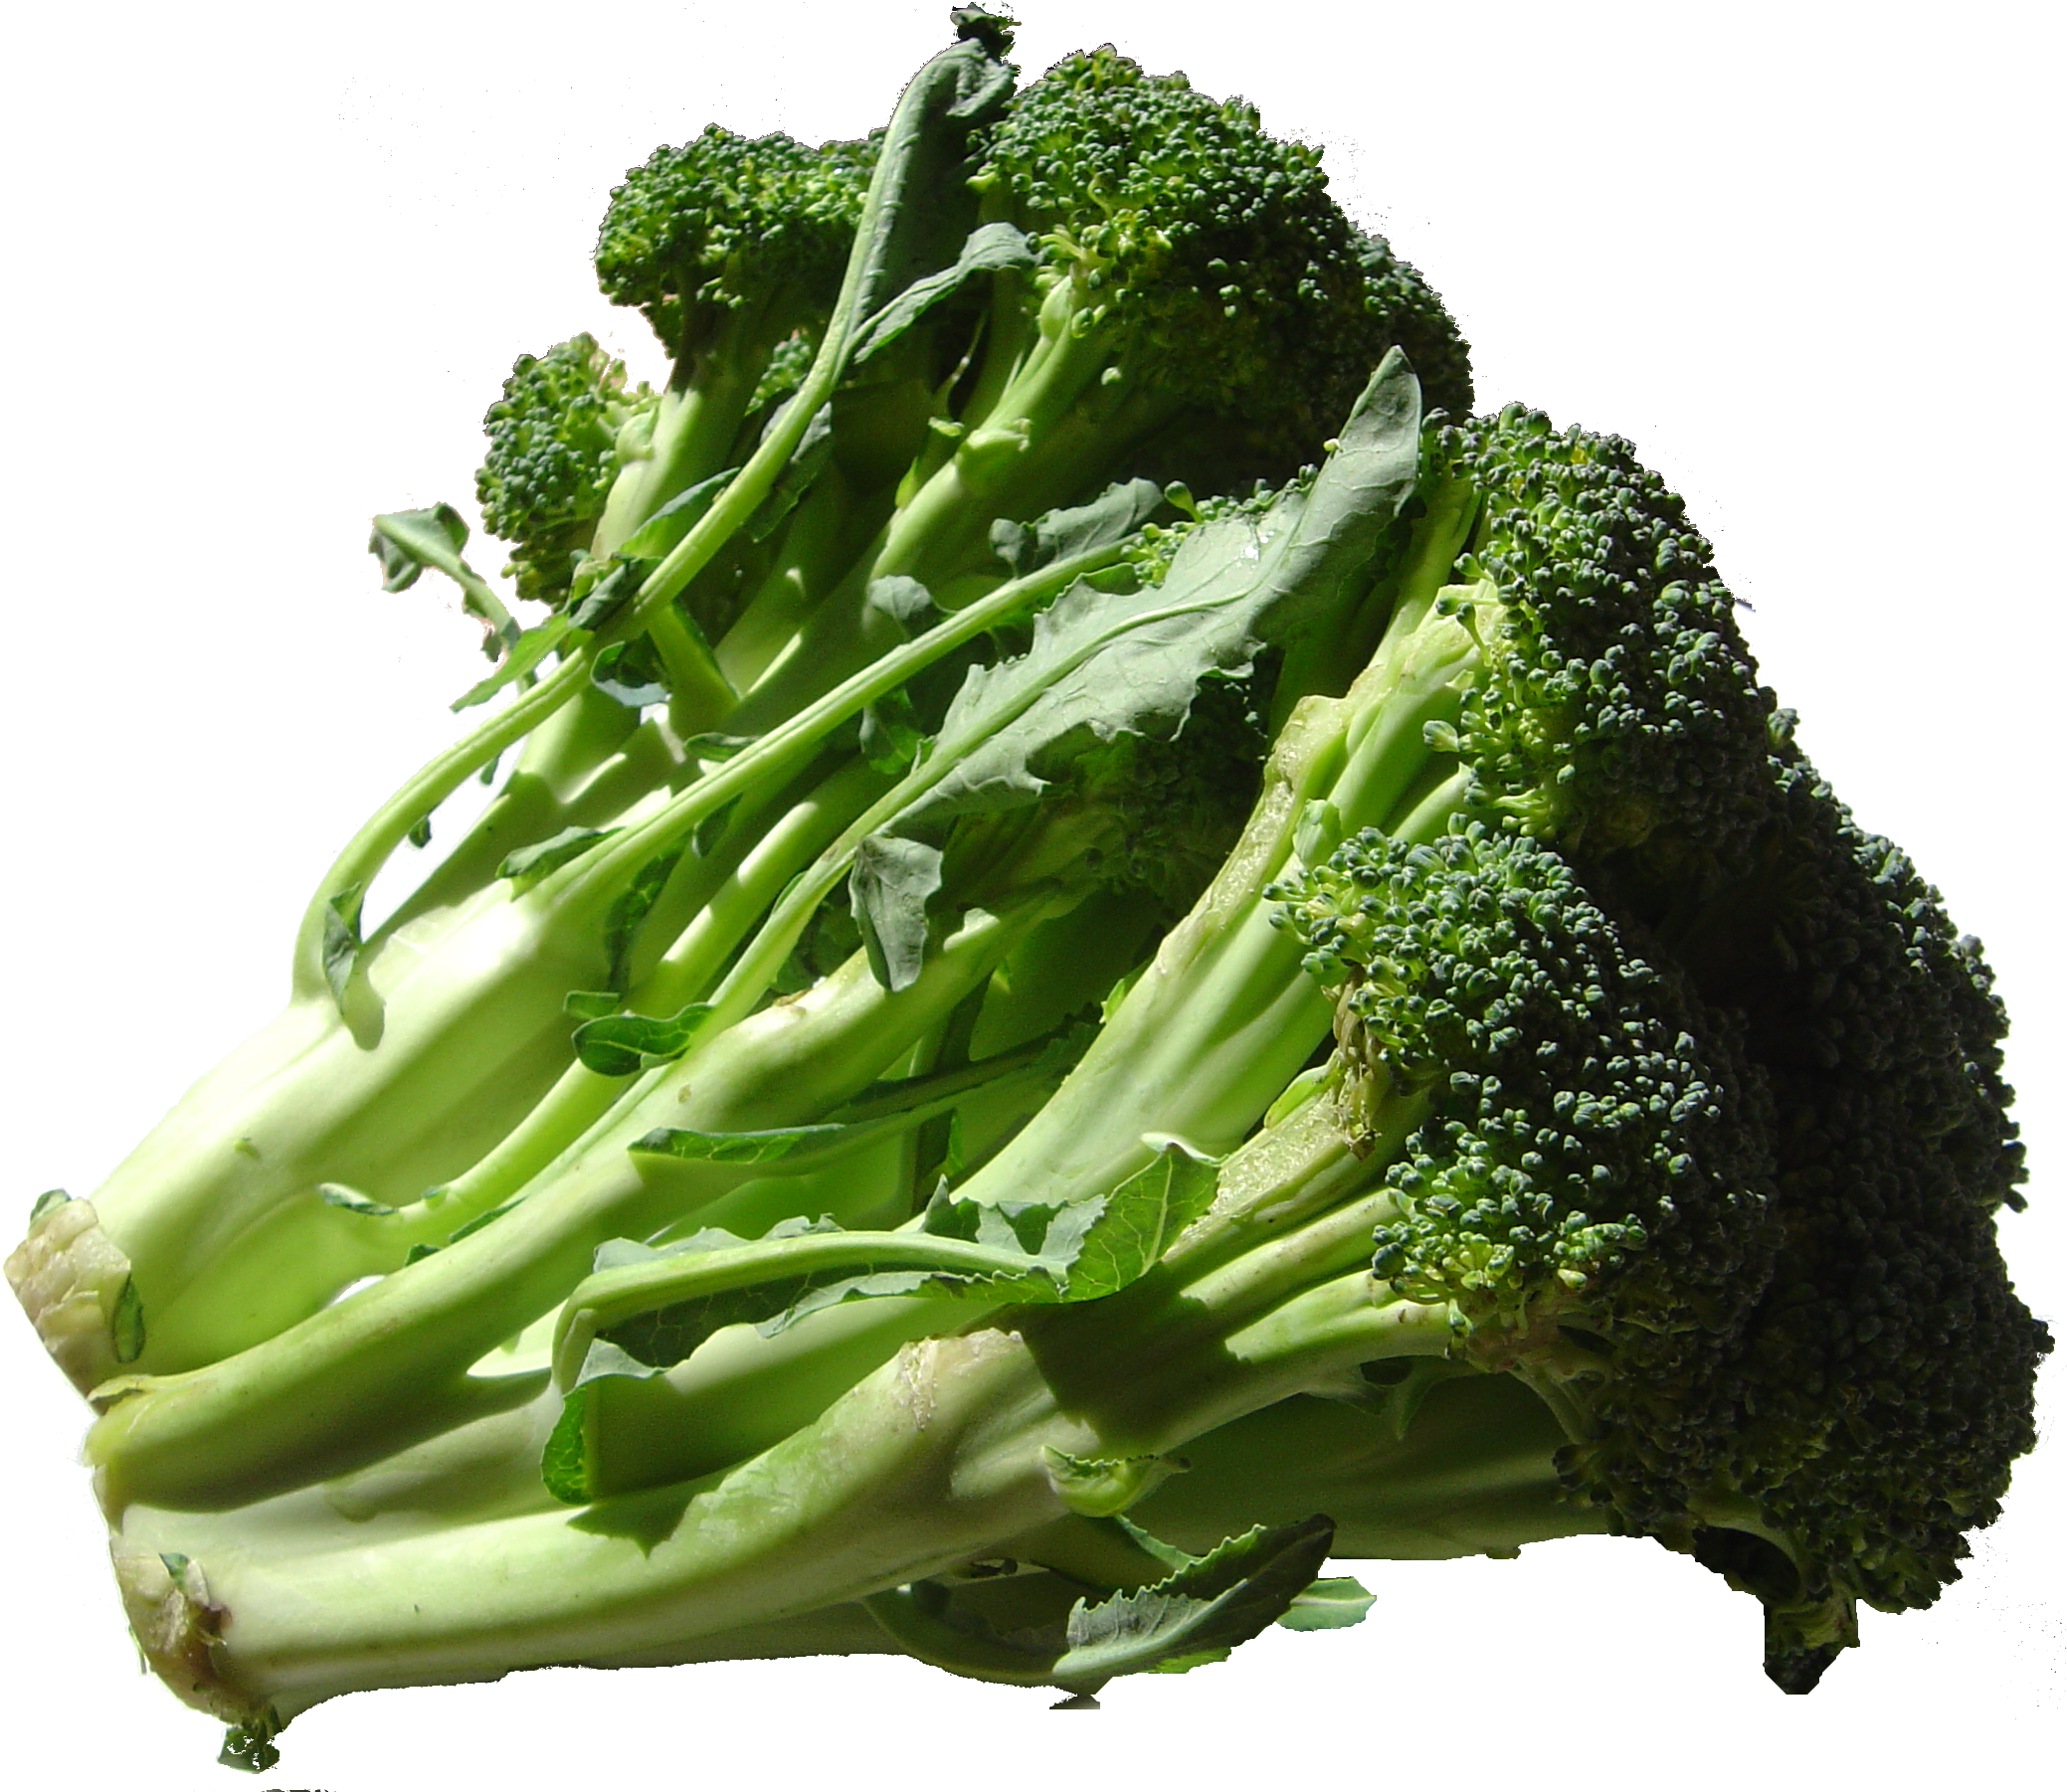 broccoli is healthy food for babies under 1 year